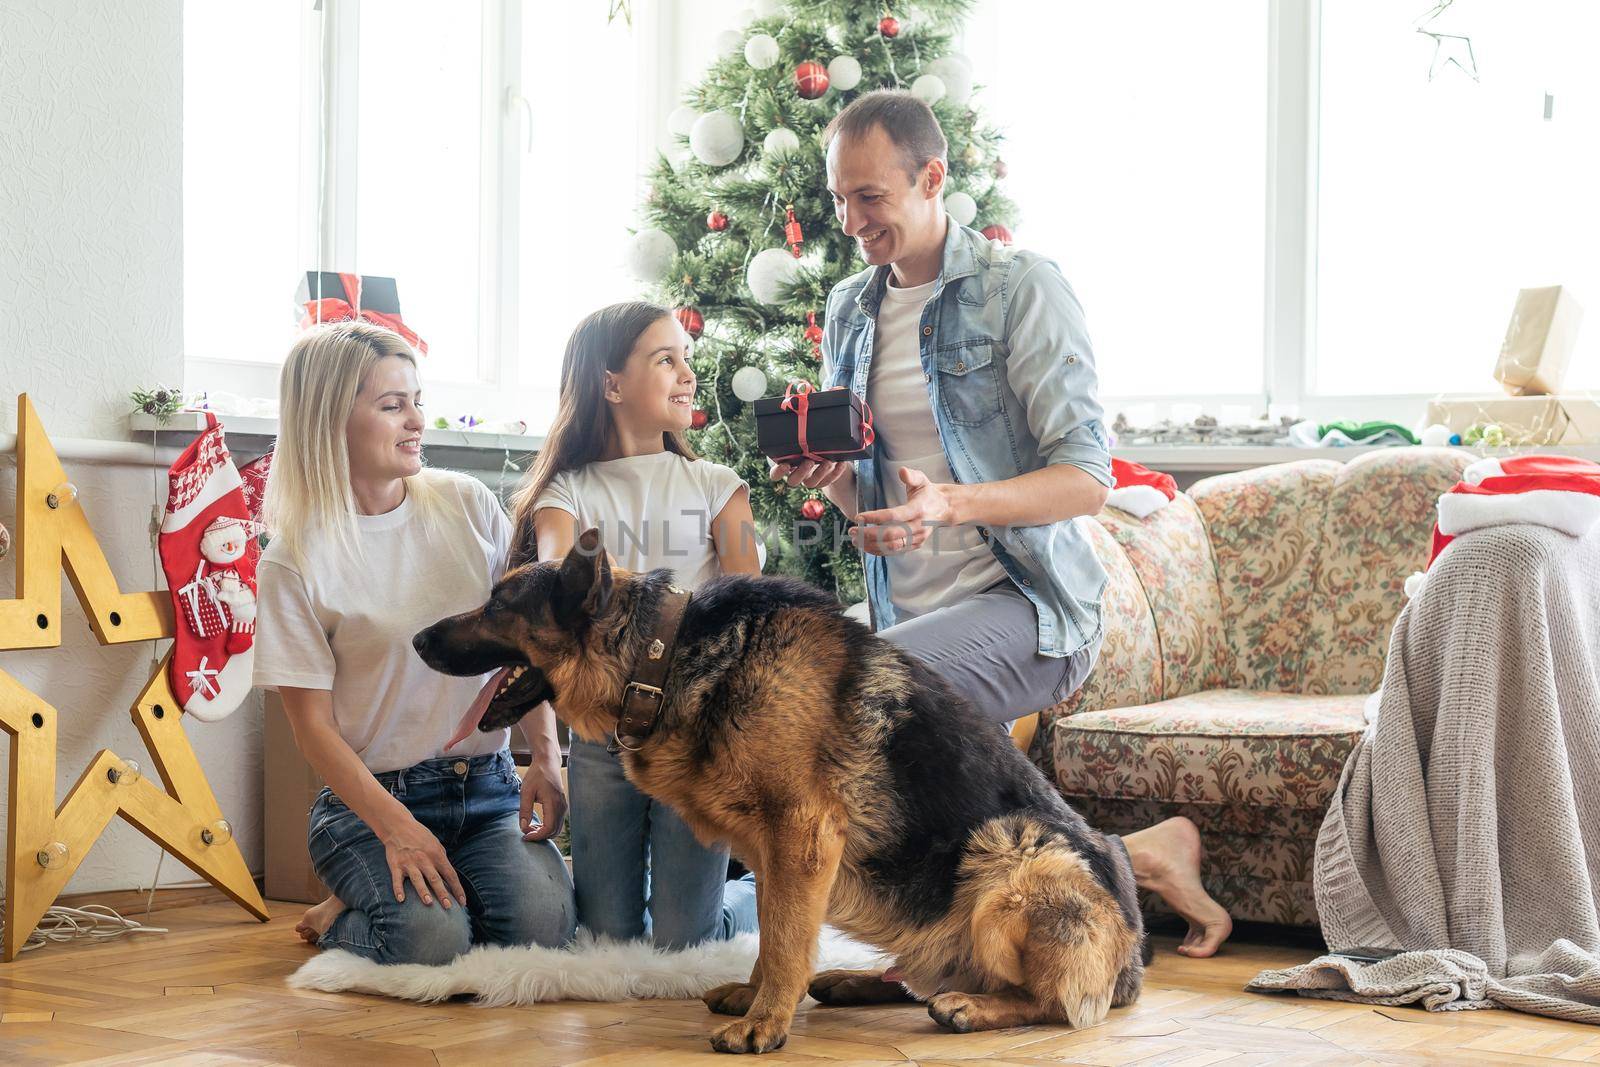 happy family and cute dog having fun at christmas tree. atmospheric emotional moments. merry christmas and happy new year concept